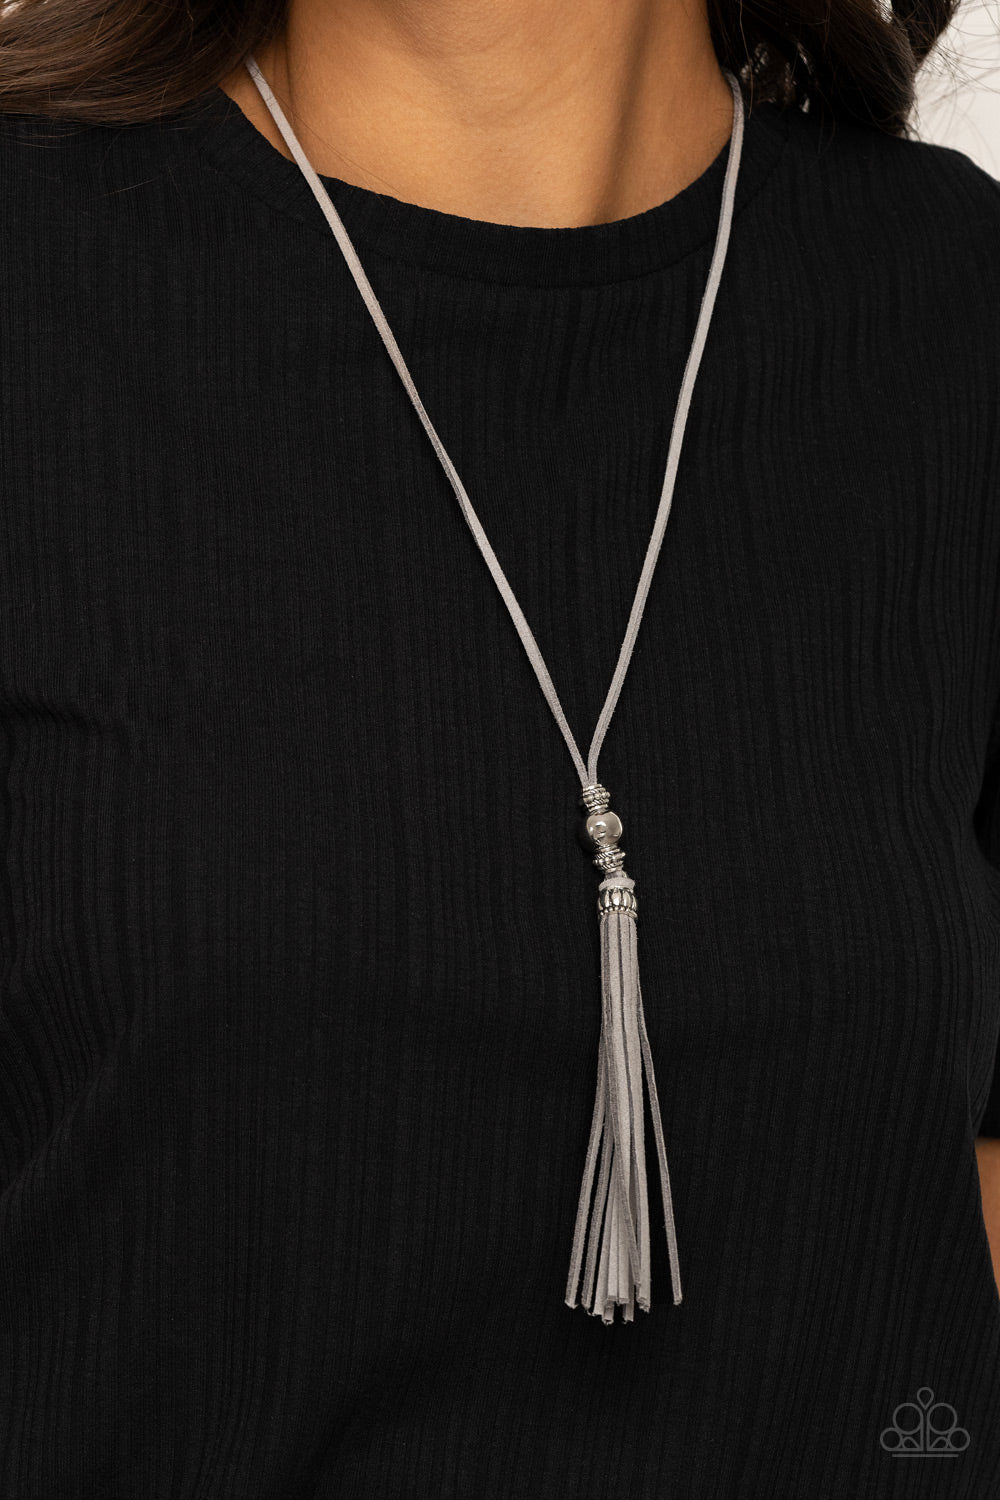 Hold My Tassel Necklace - Silver